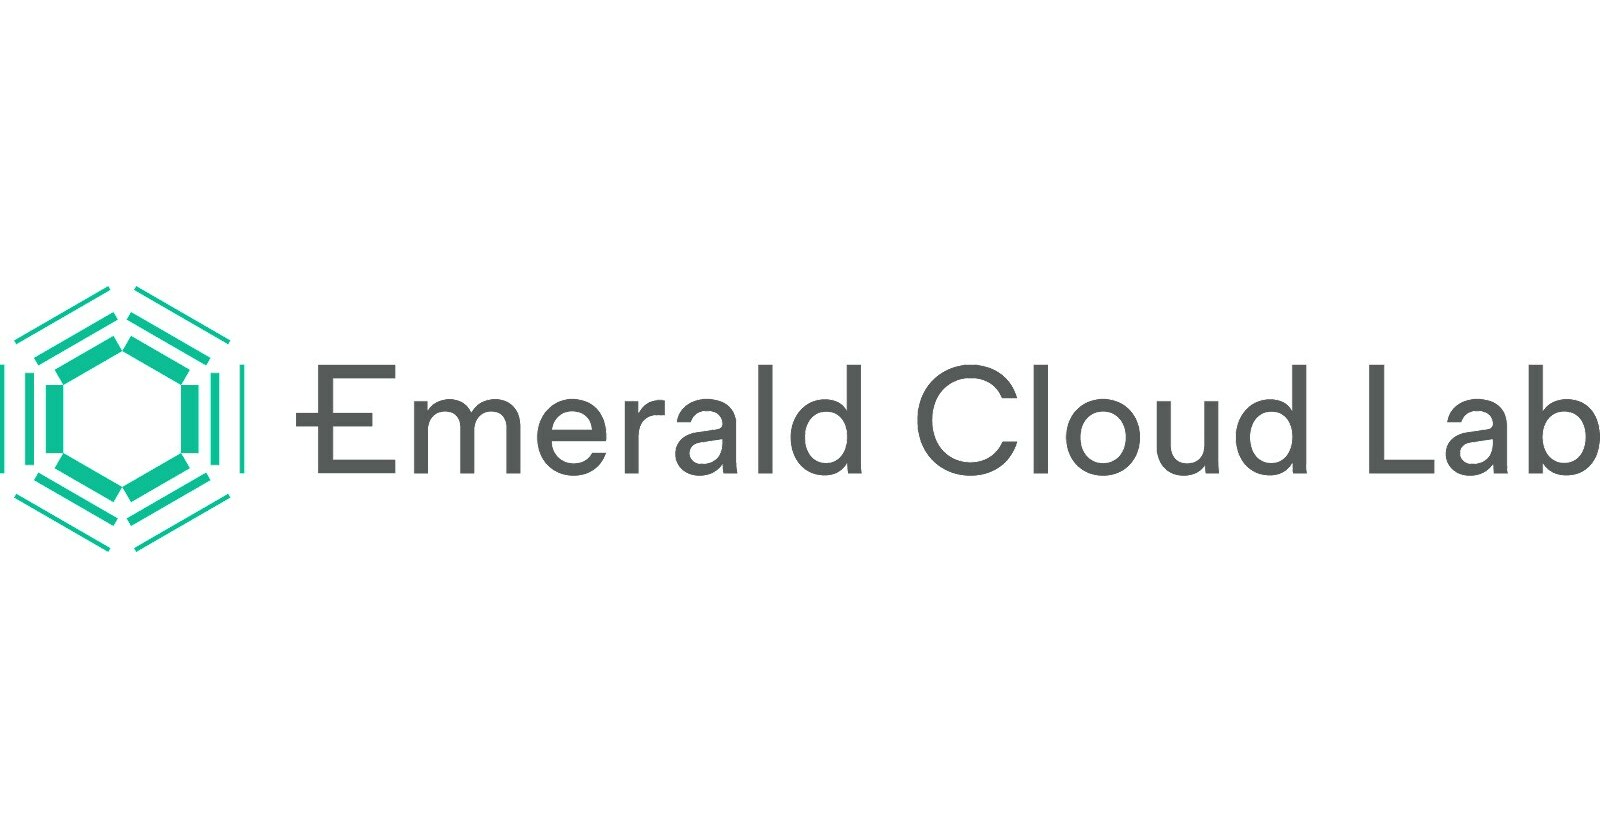 Emerald Cloud Lab to Relocate State of the Art Facility from South San Francisco to Austin